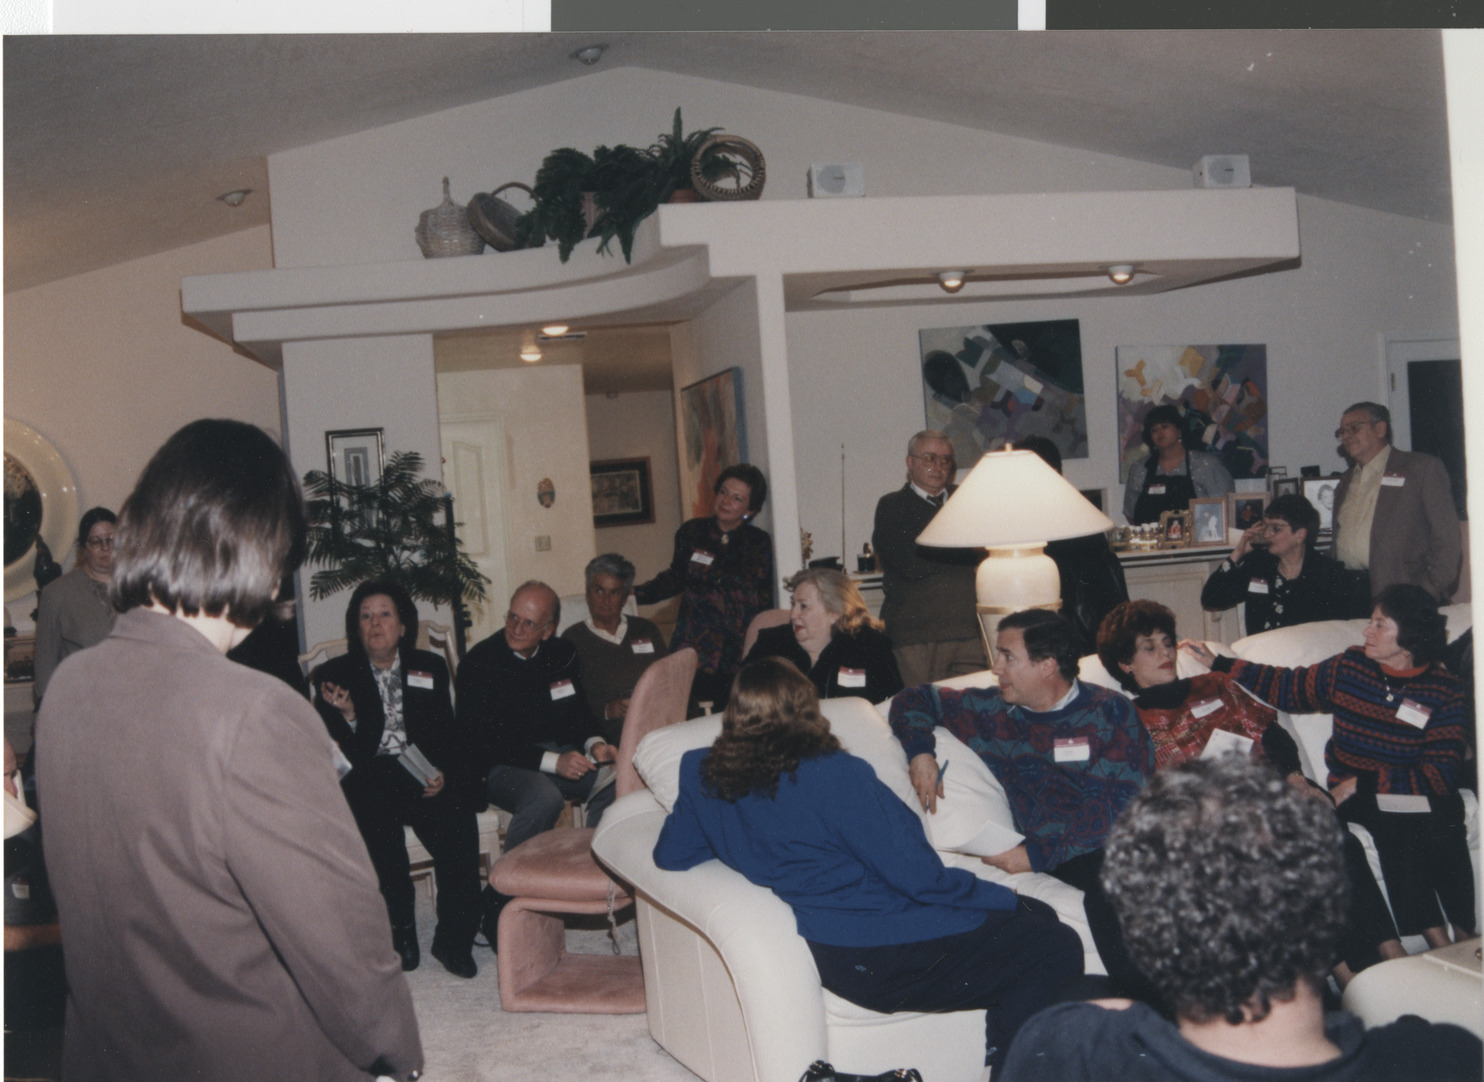 Photograph of outreach event at Stalsers, January 1999